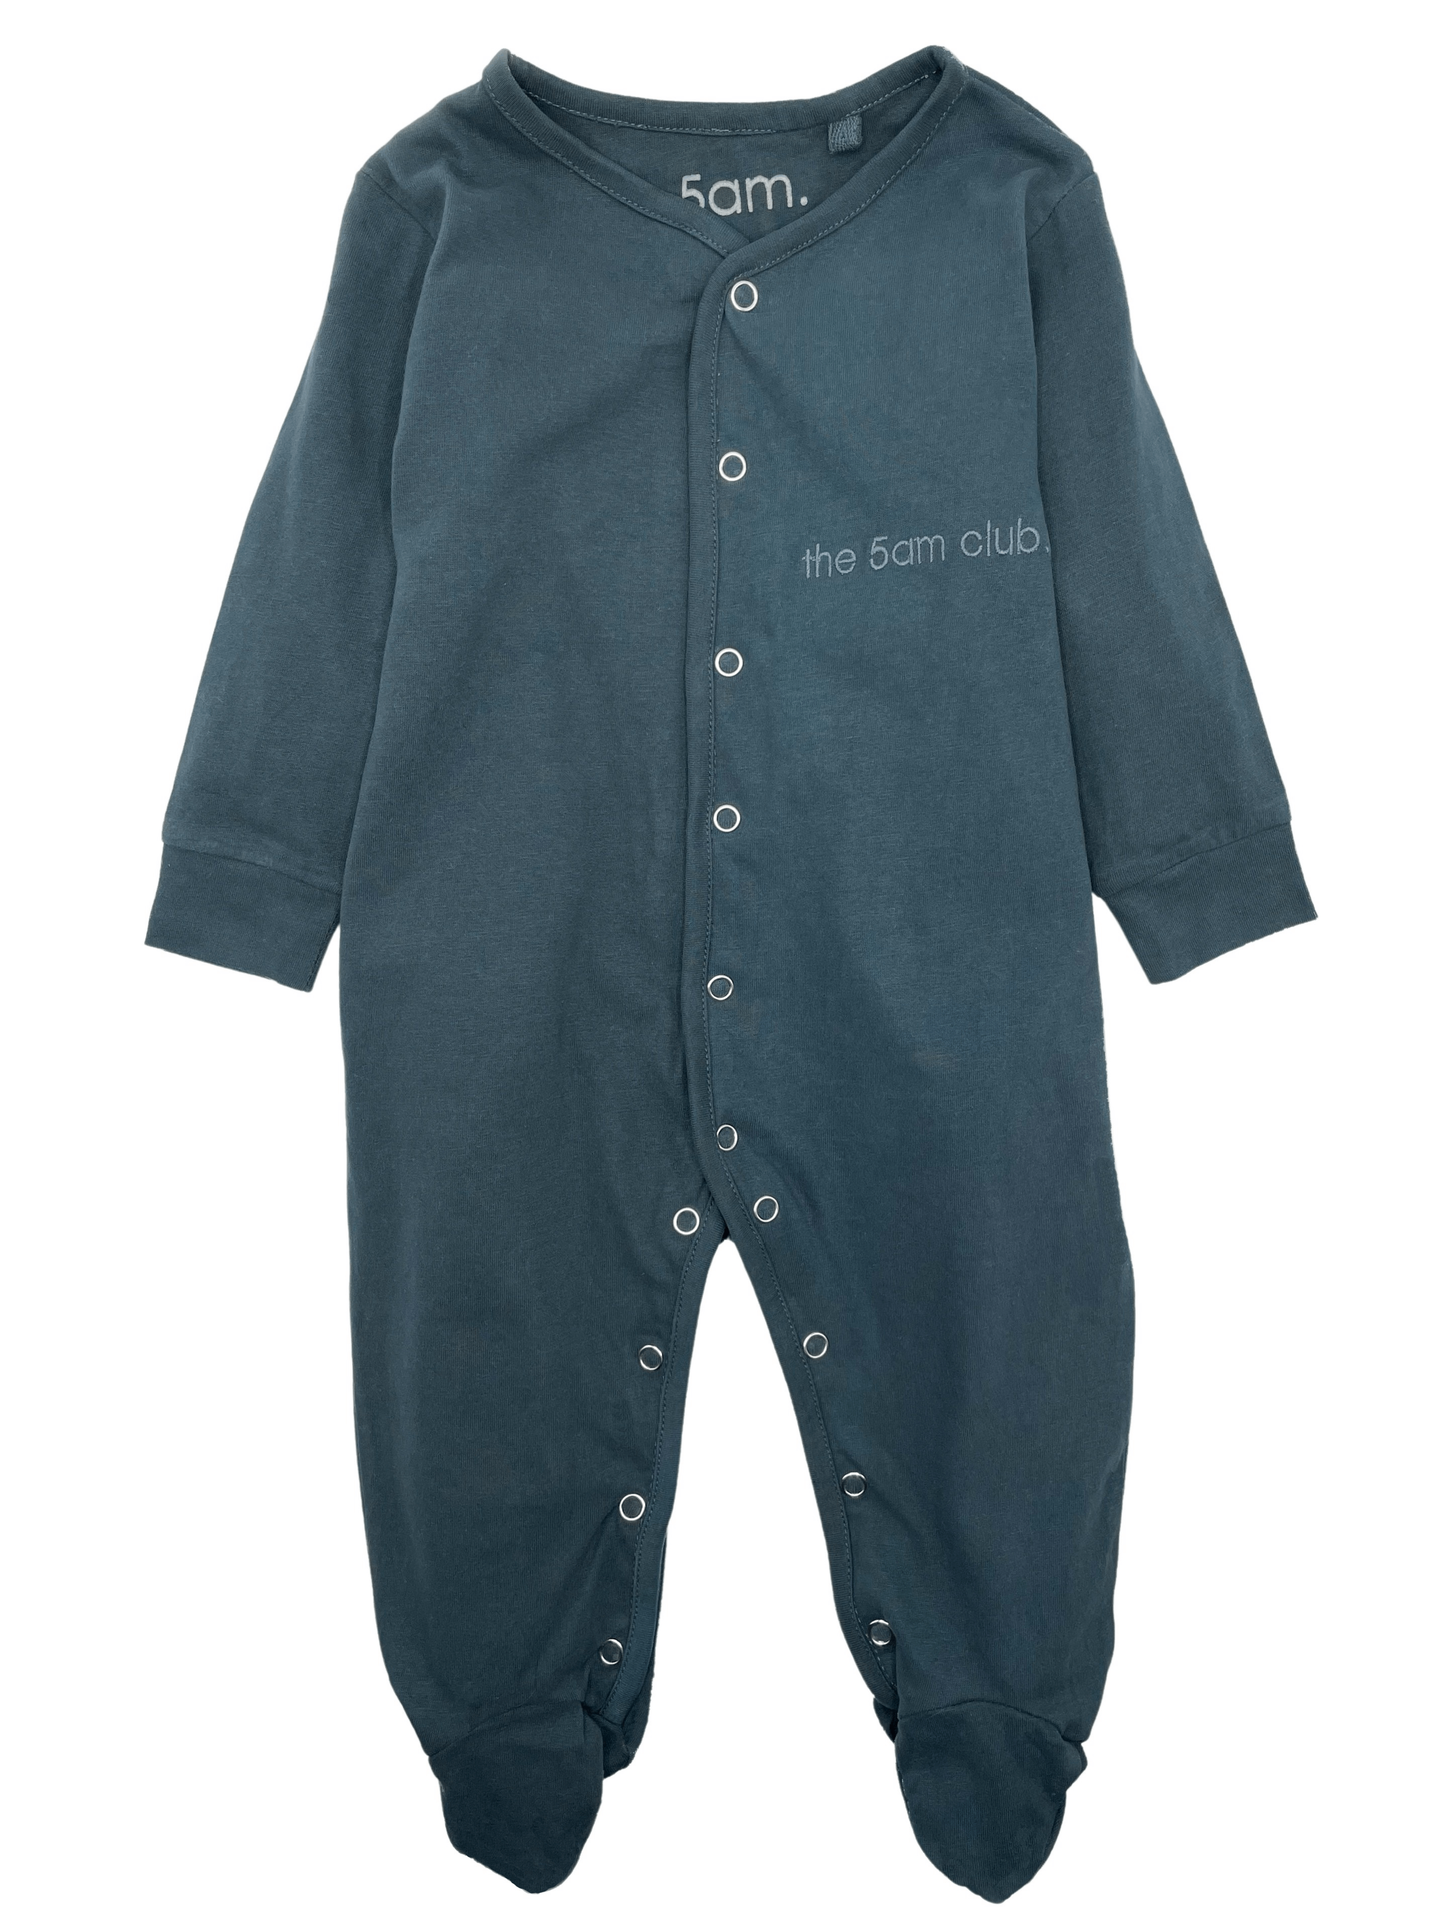 Charcoal grey babygrow with silver poppers and the 5am club logo